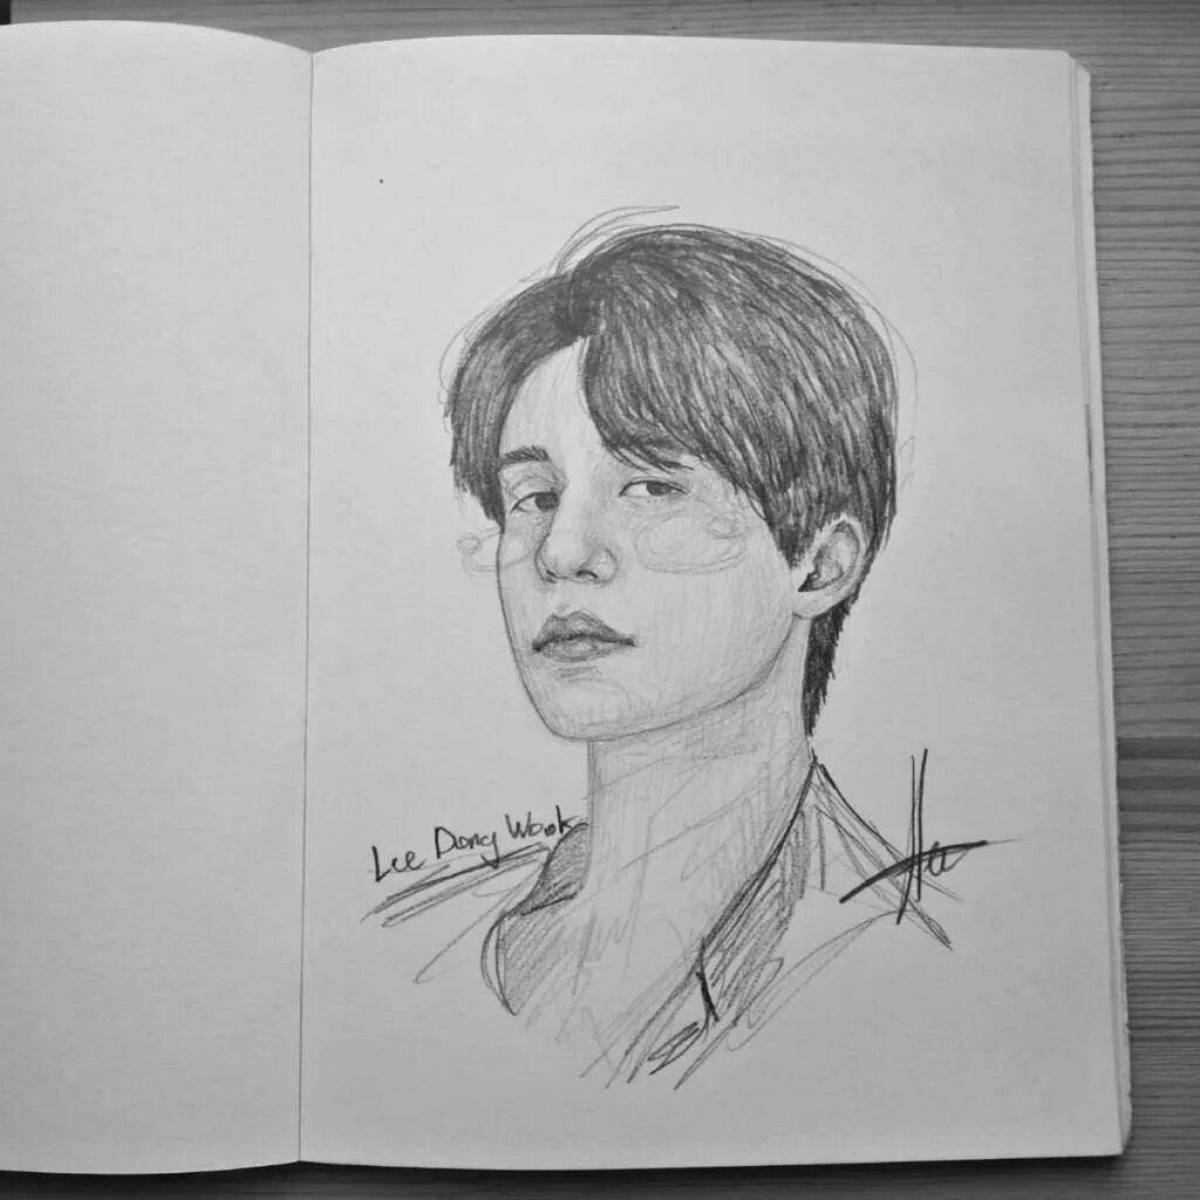 Coloring book fabulous lee dong wook